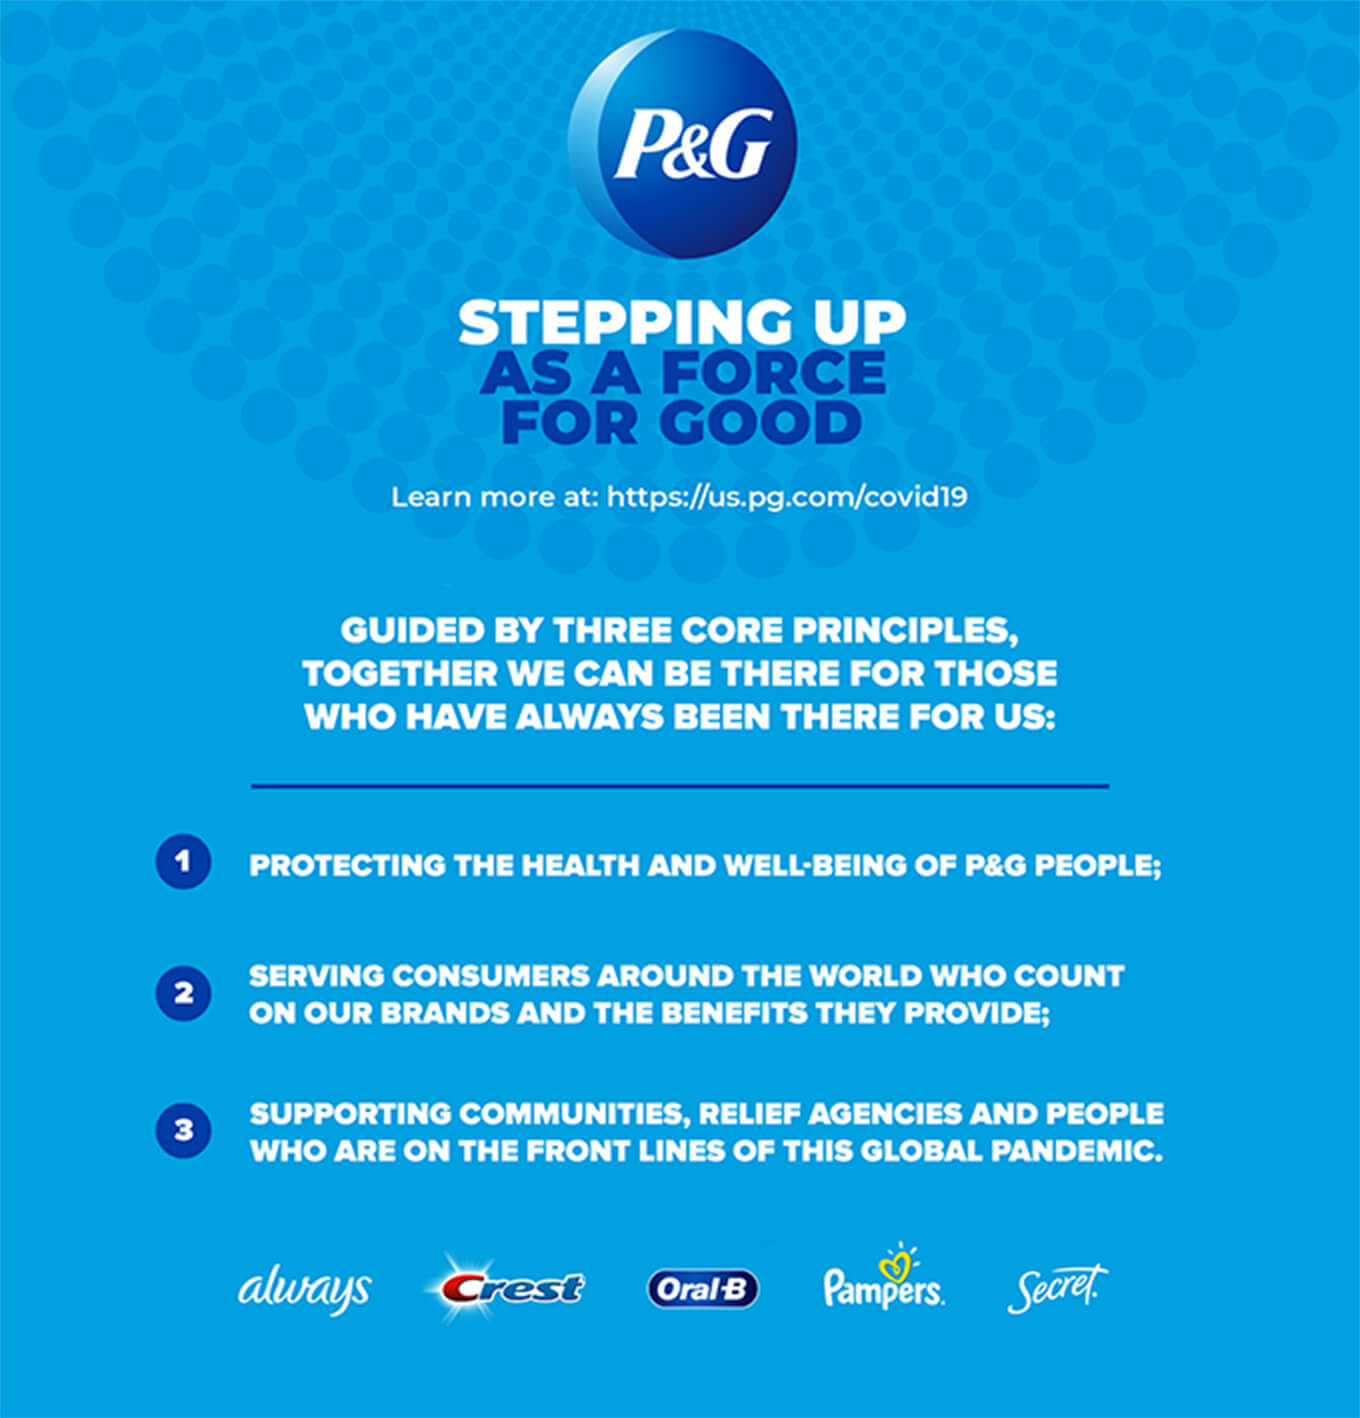 P&G Stepping up as a Force for Good